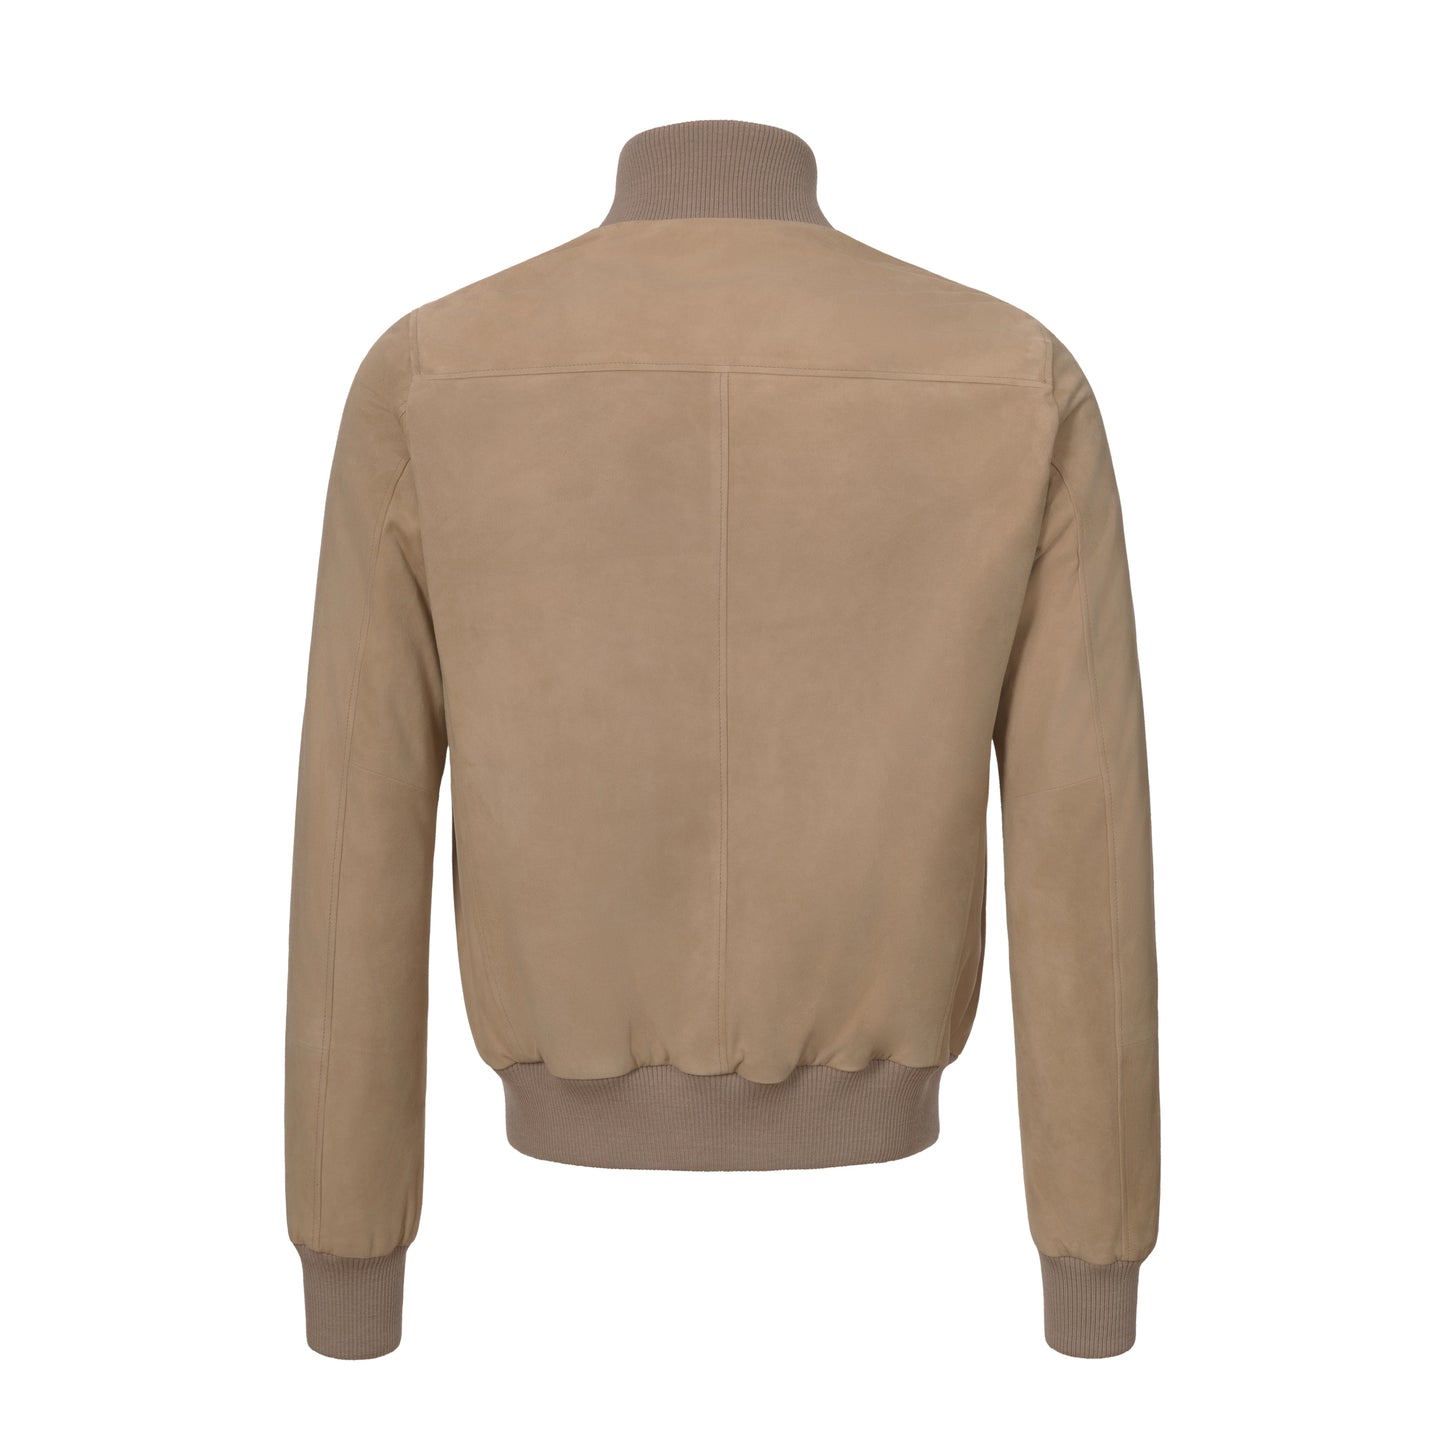 Button-Up Suede Bomber Jacket in Peanut Brown